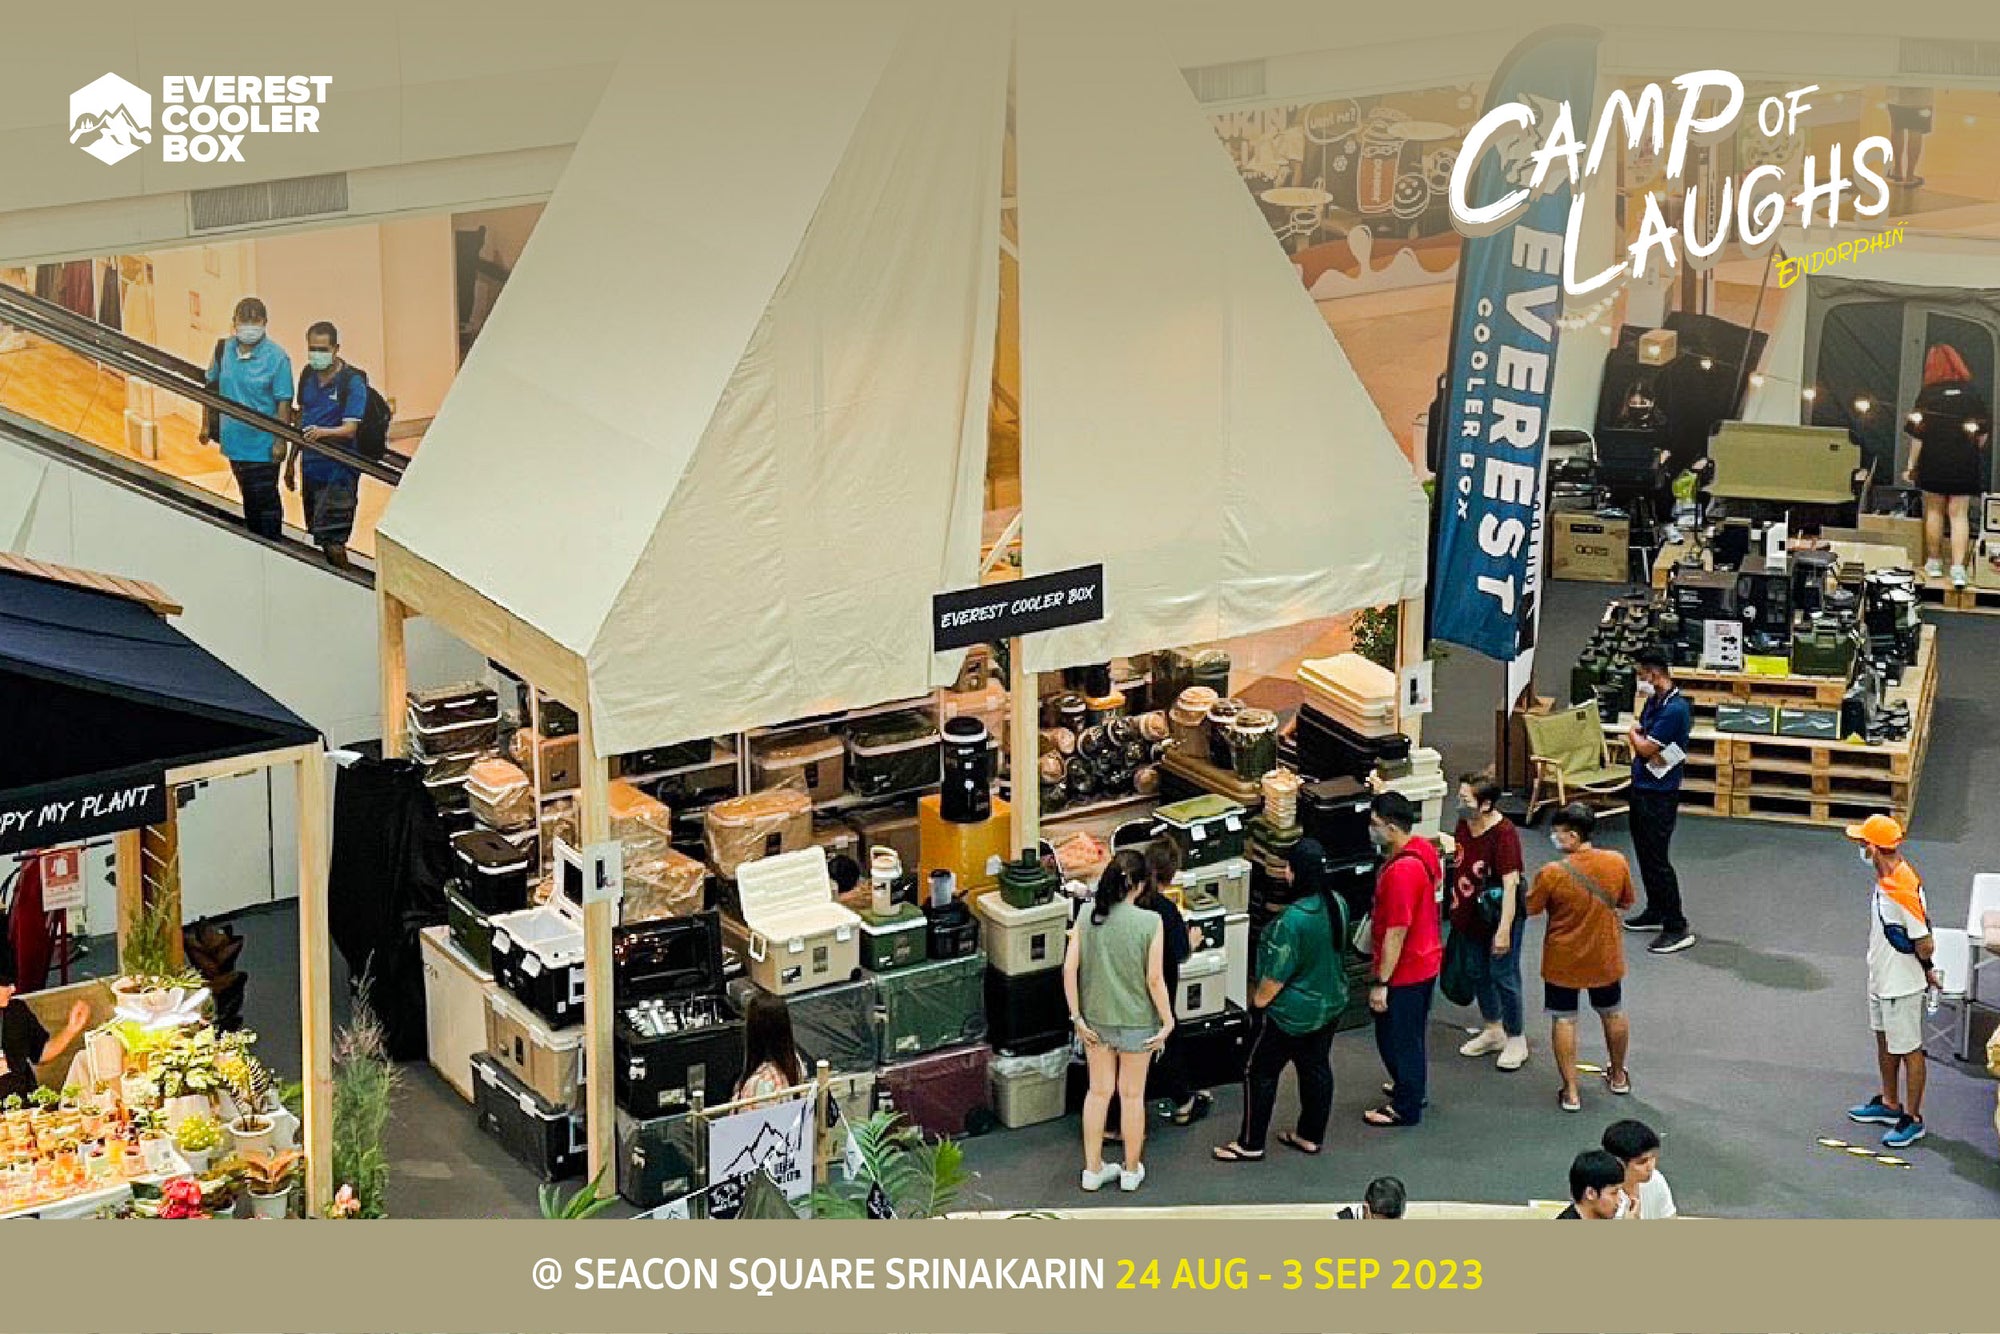 Camp Of Laughs  Seacon Square 24 AUG - 3 SEP 2023